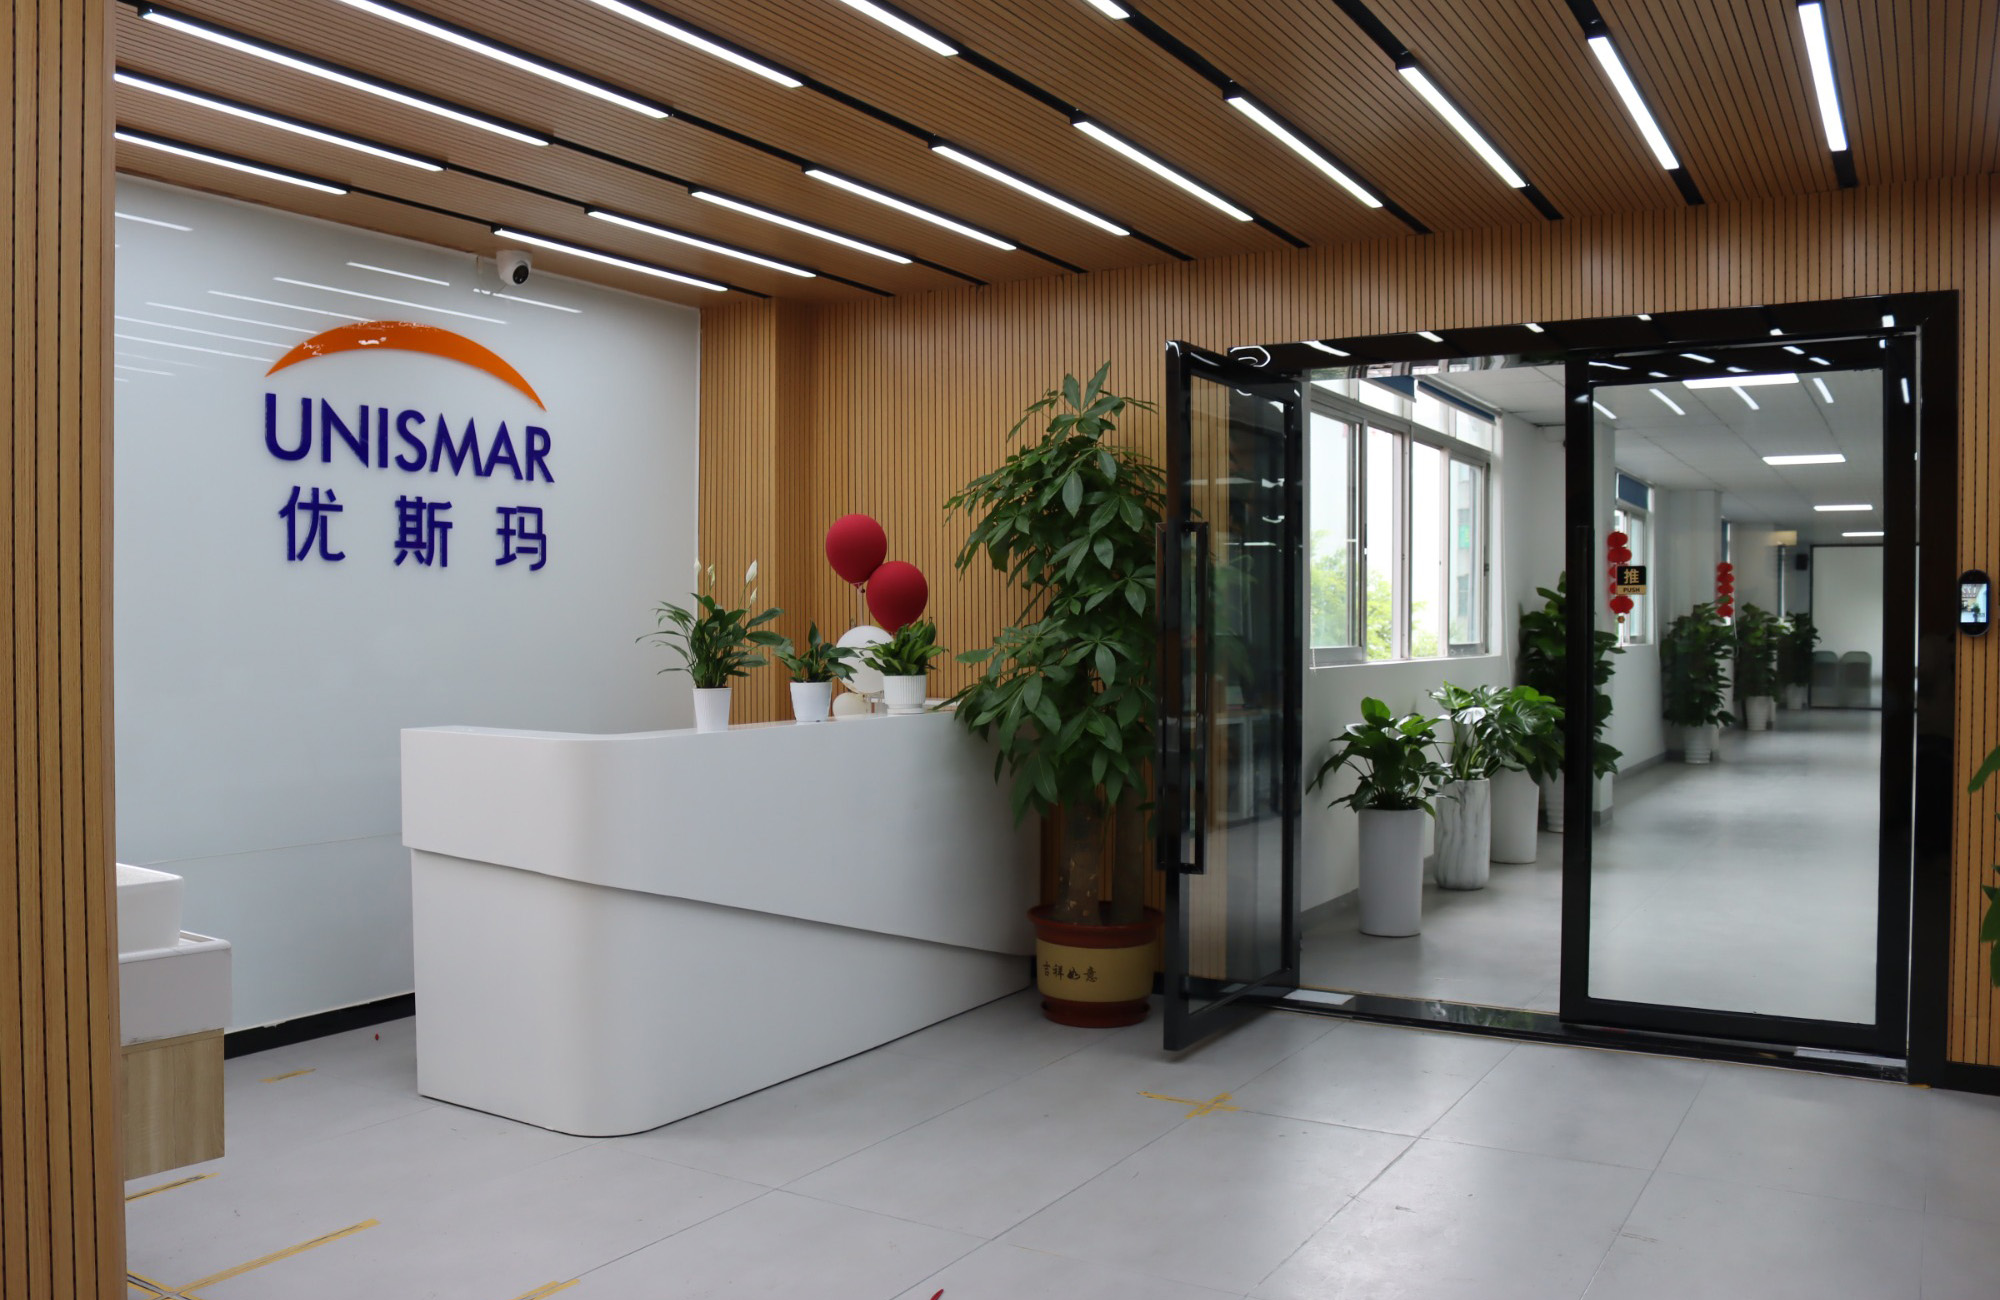 UNISMAR moved to new sales center in Oct 2022